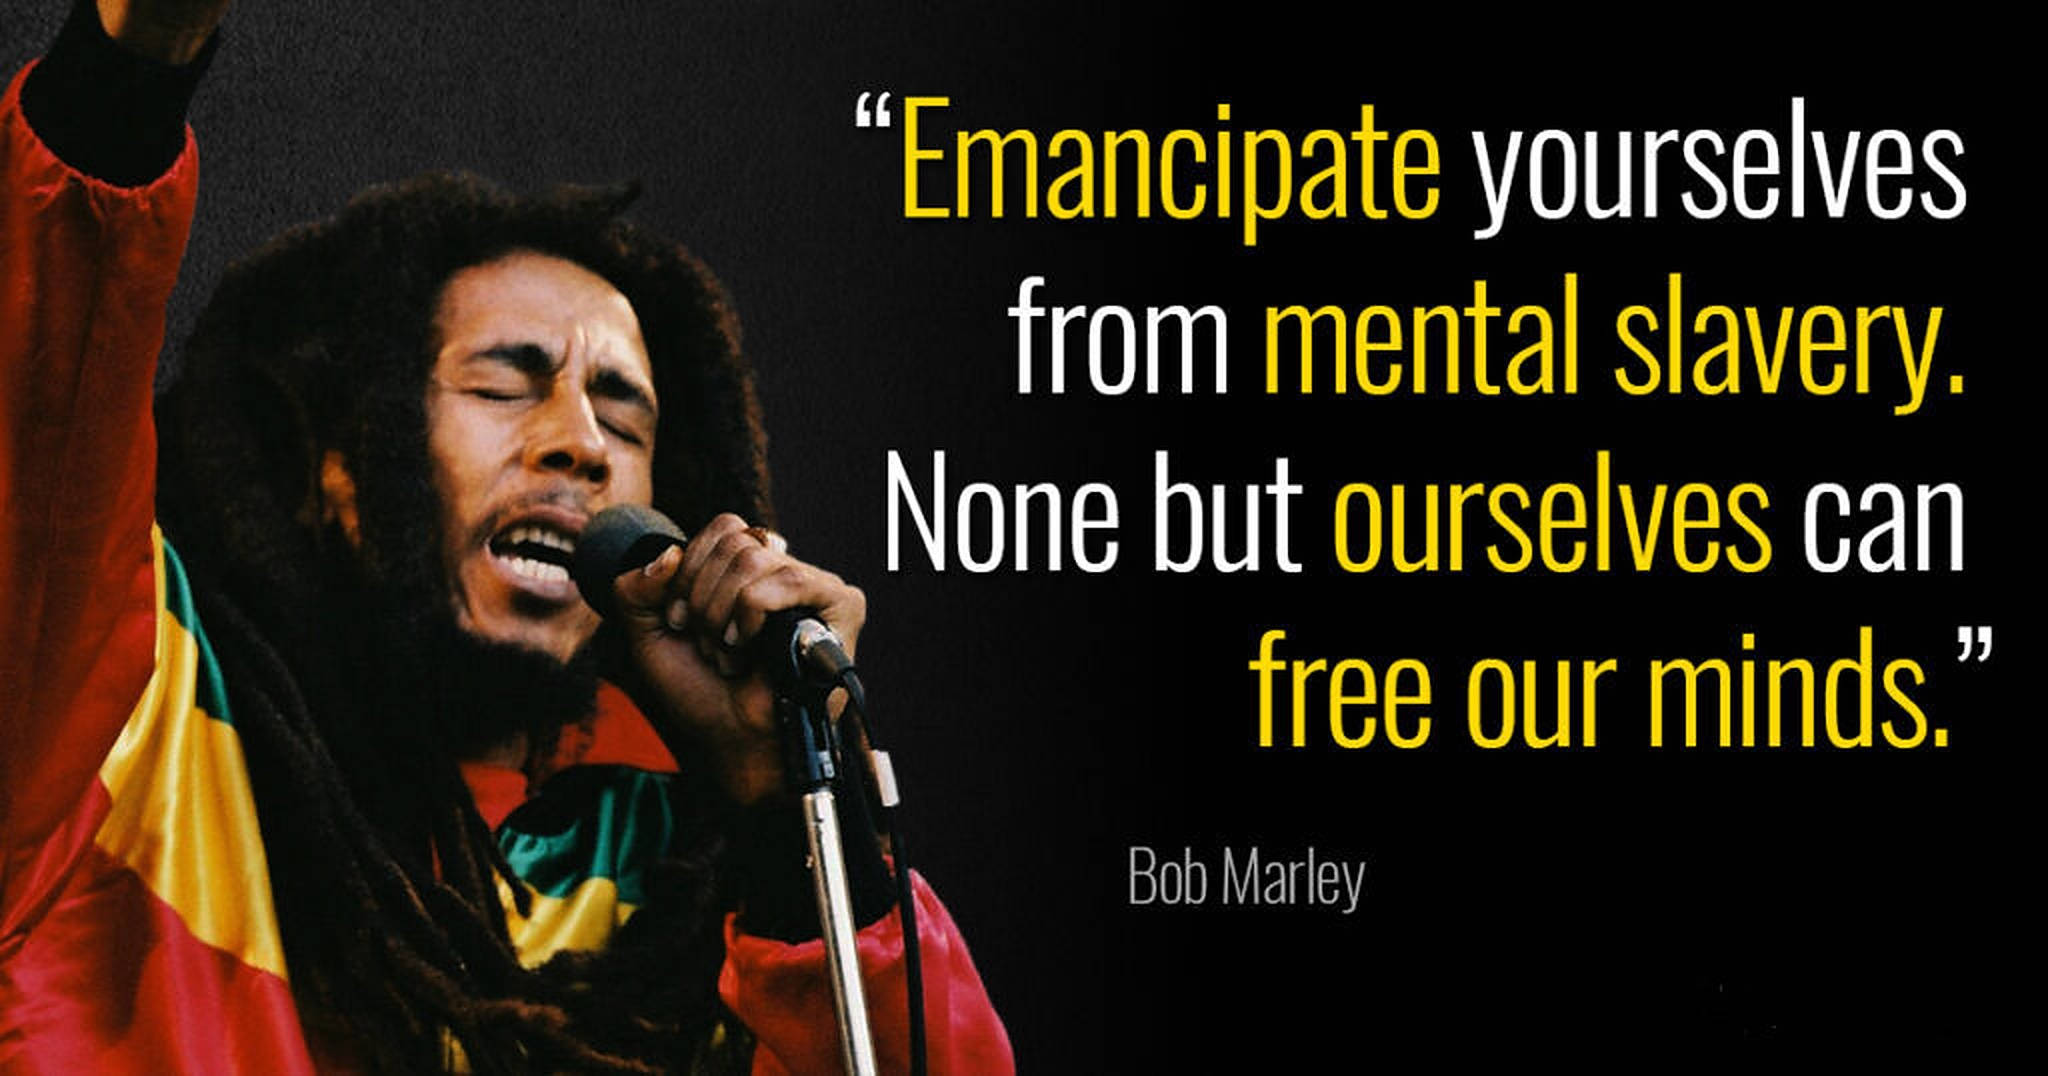 Emancipate yourselves from mental slavery // Bob Marley